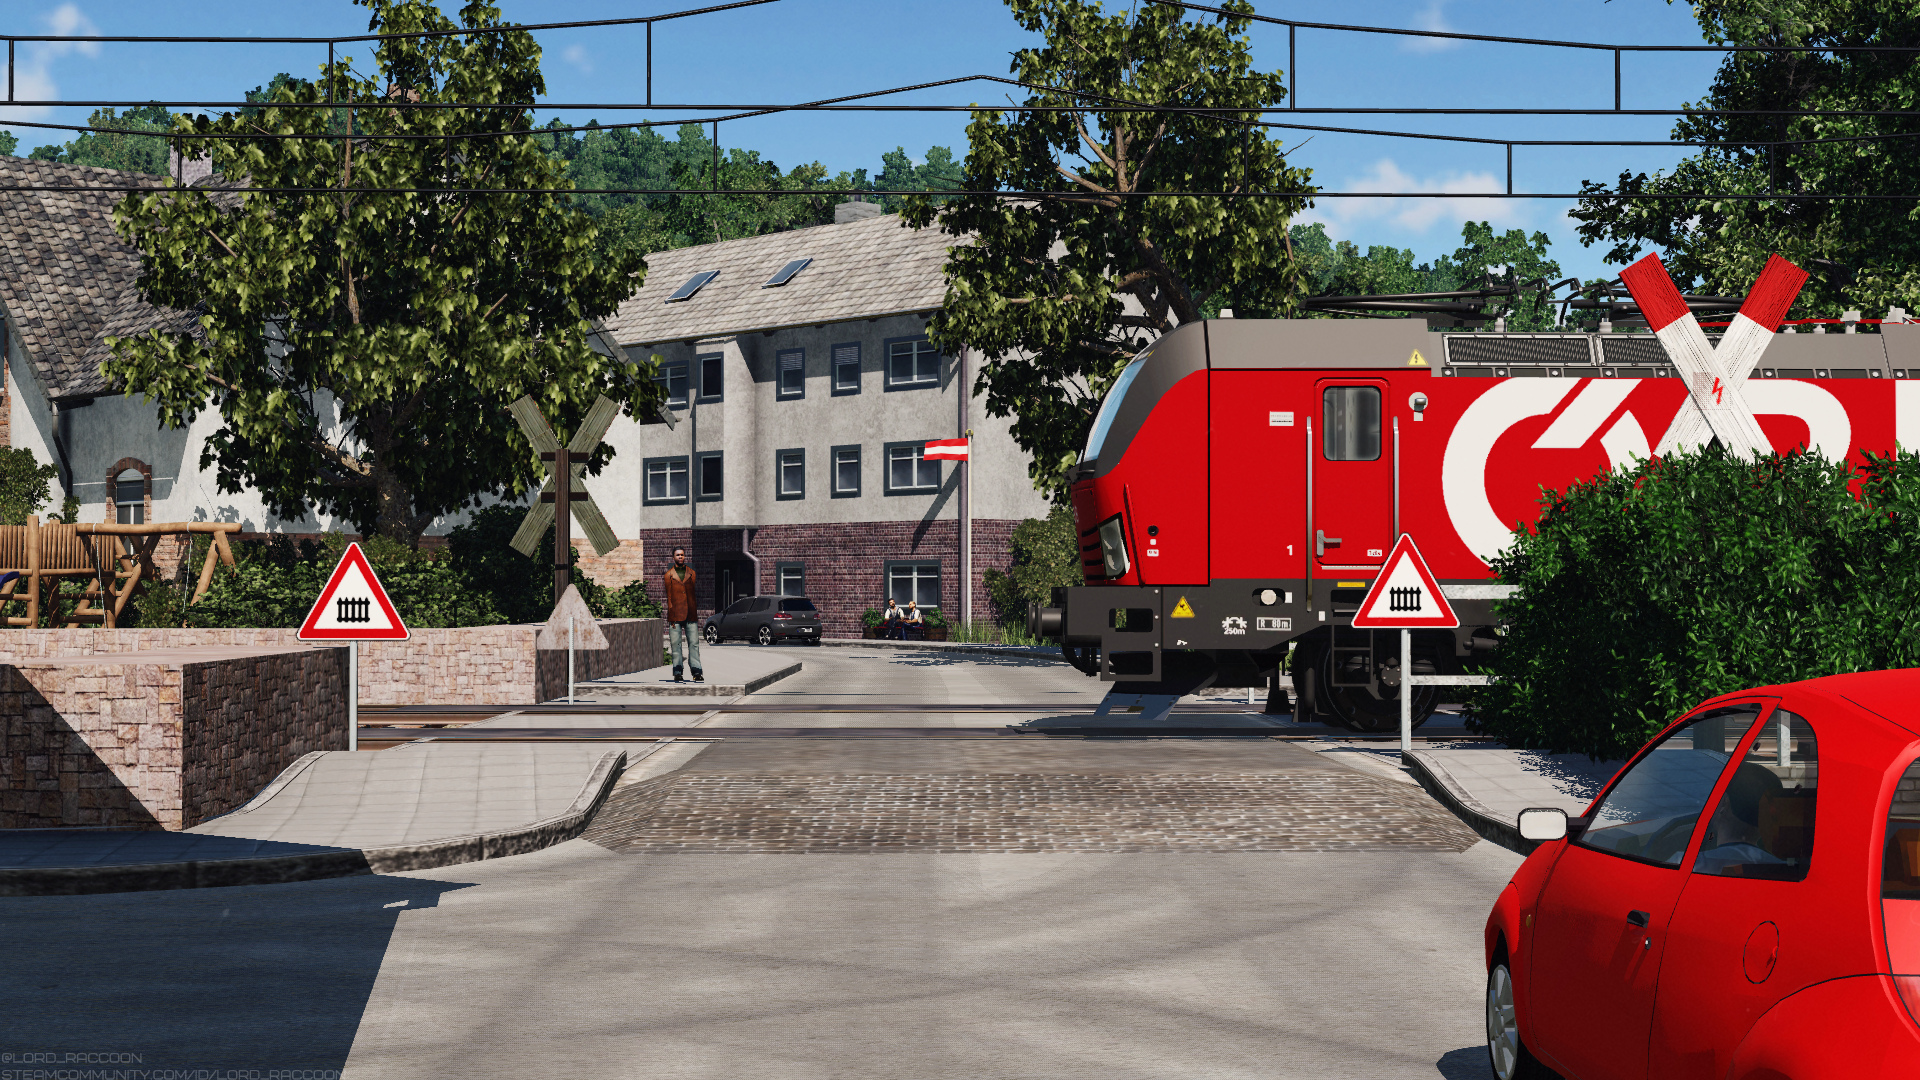 Vectron crossing the street in the small mountain village